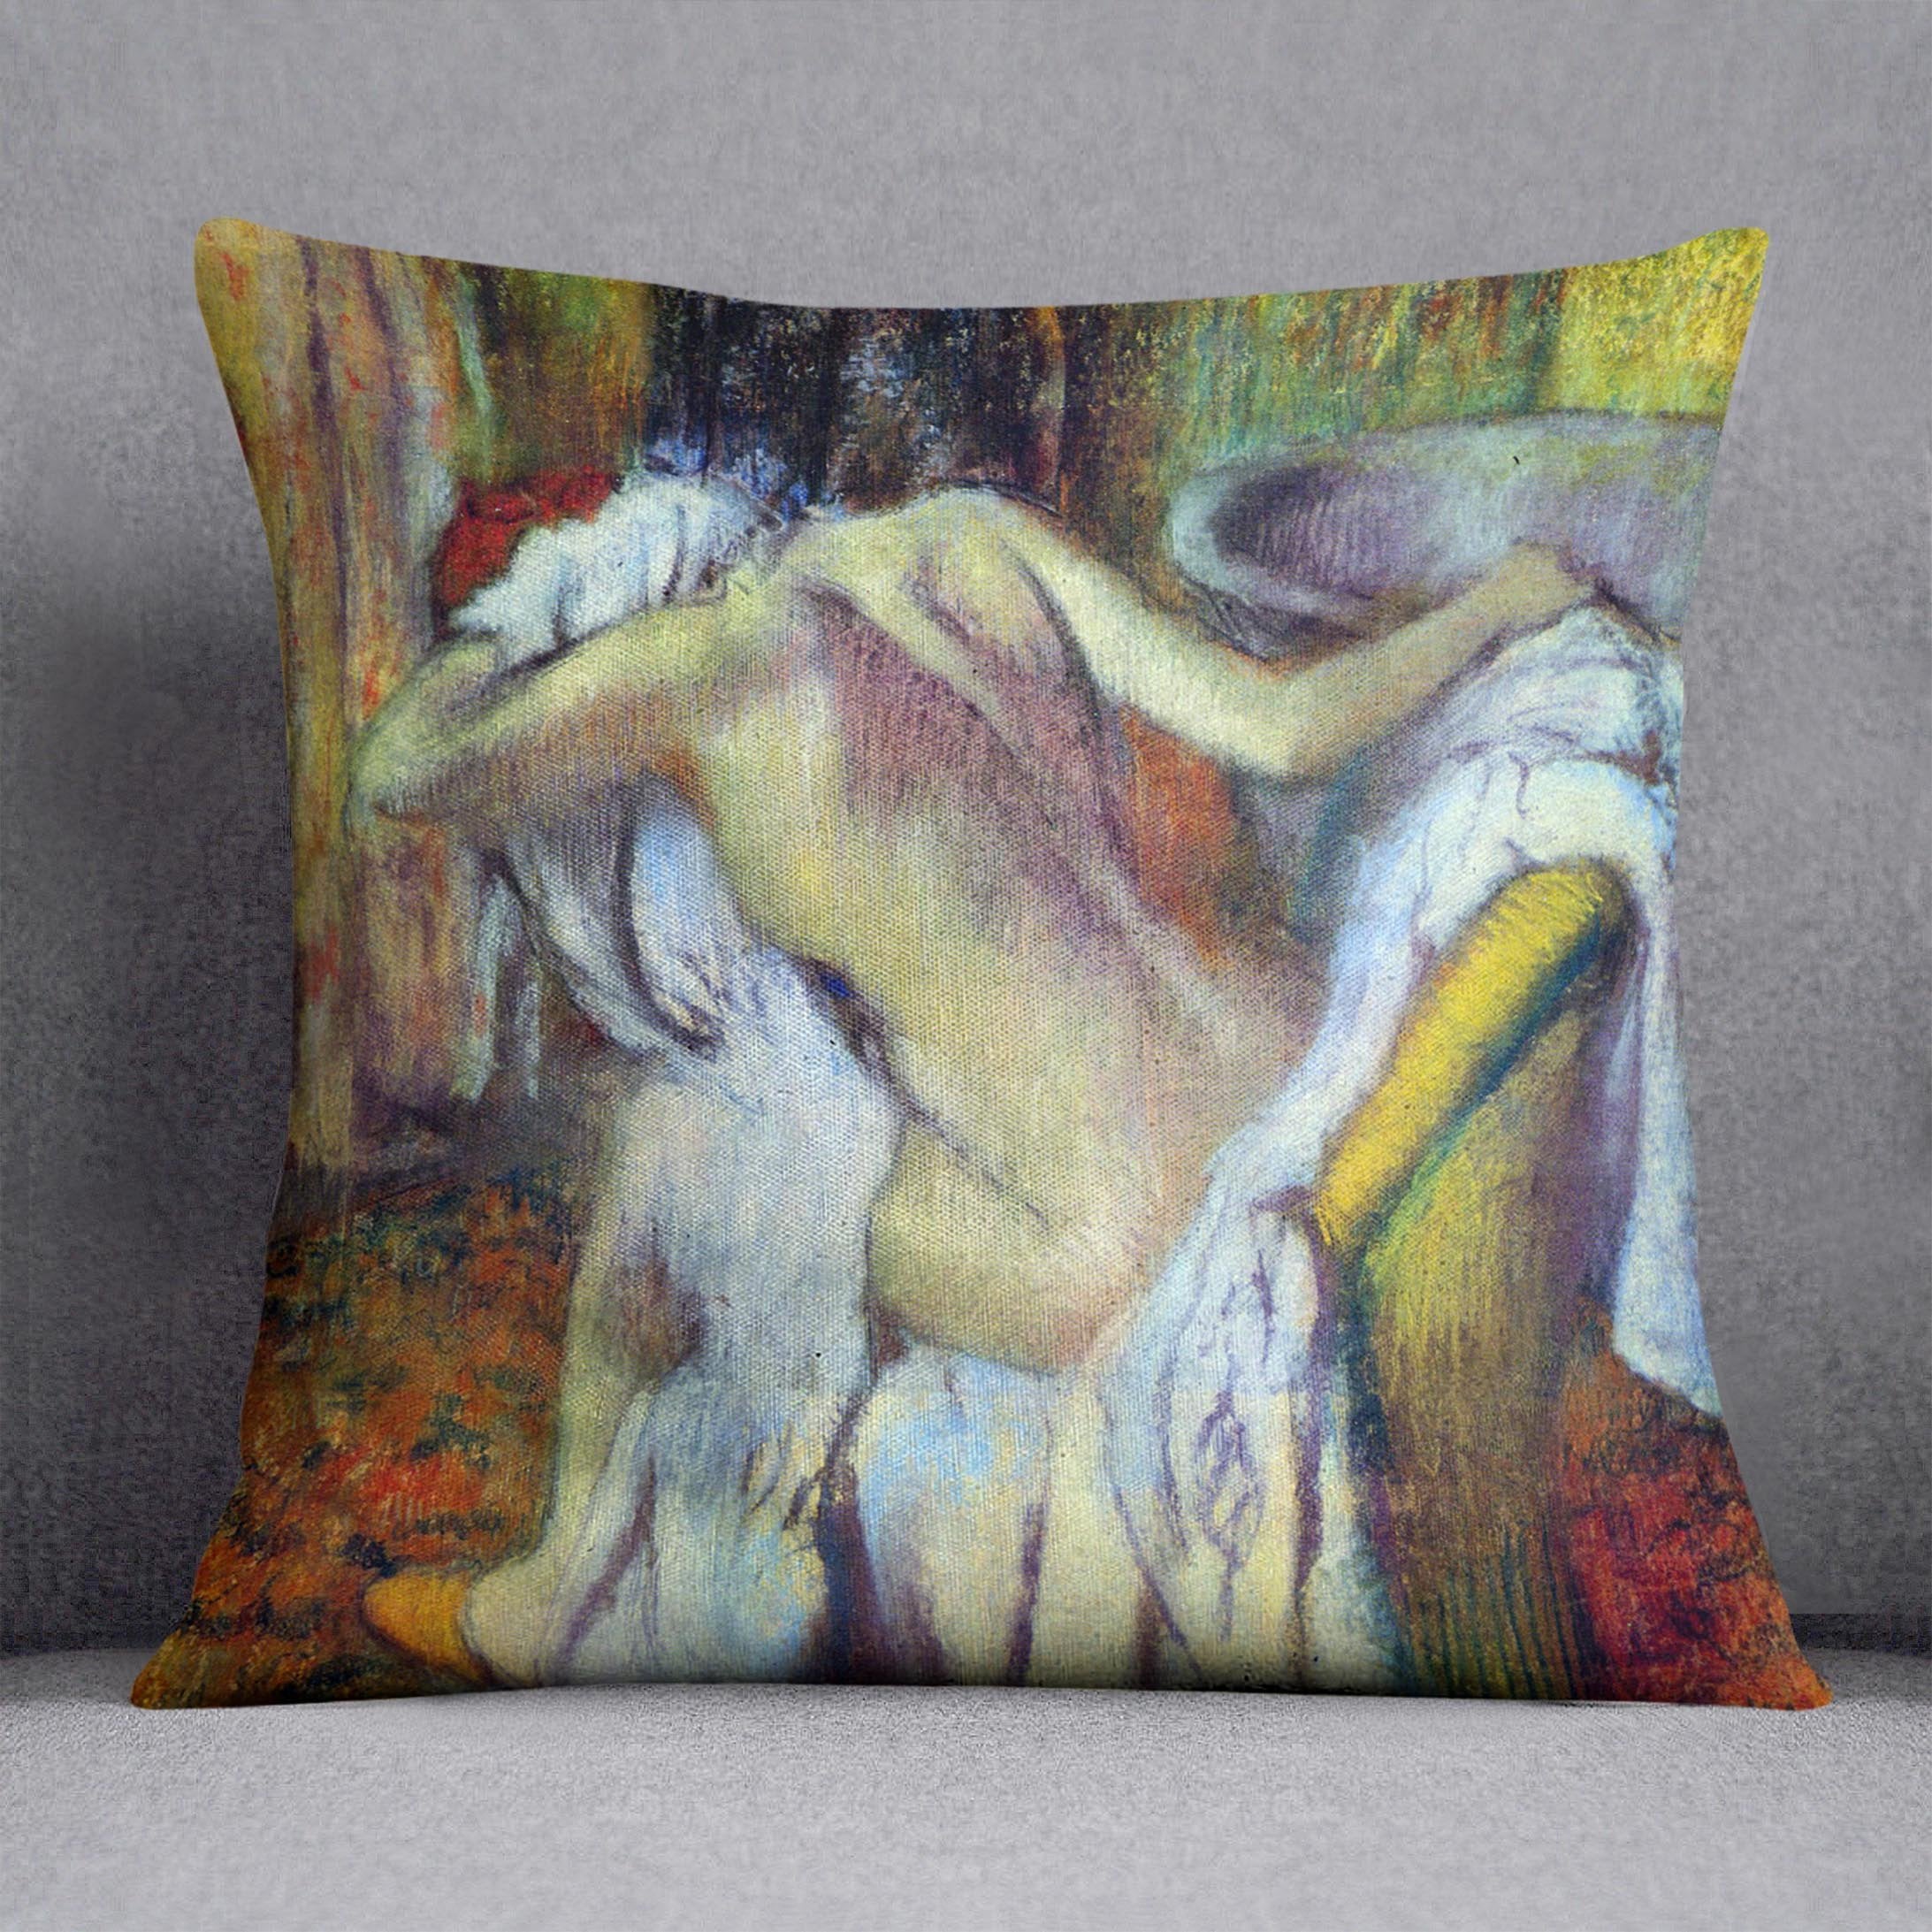 After Bathing 4 by Degas Cushion